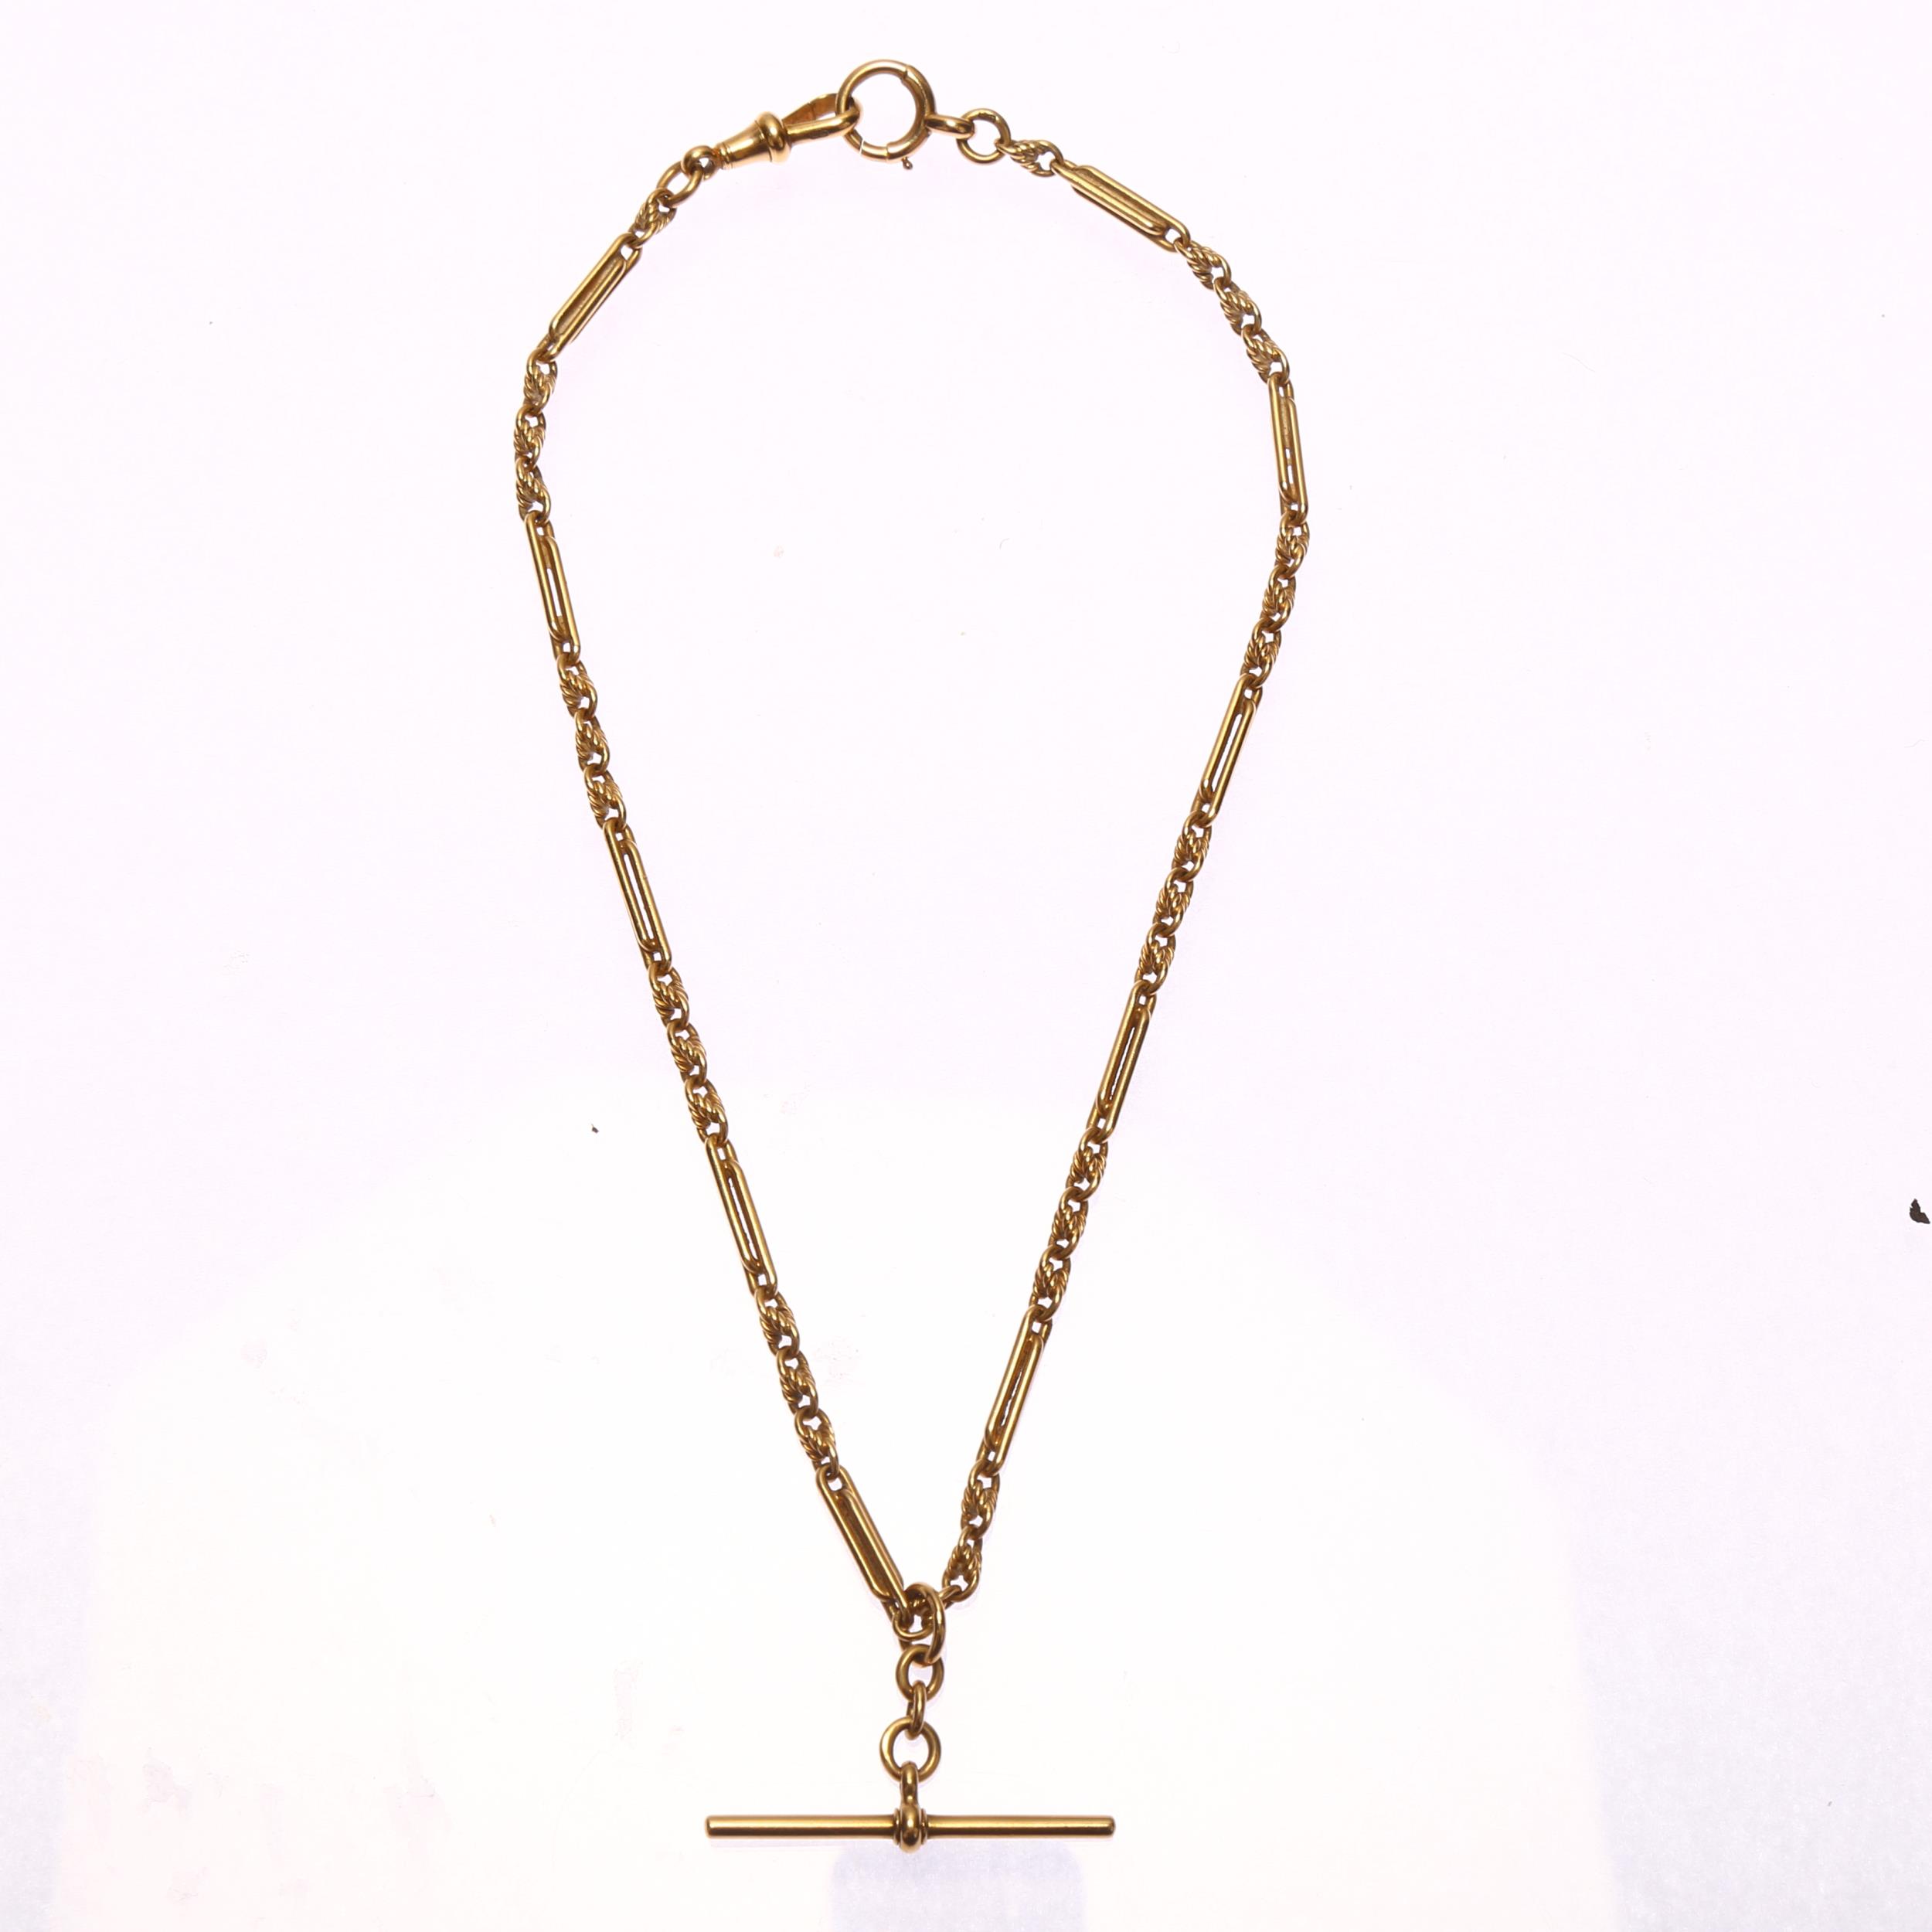 An early 20th century 18ct gold fancy link Albert chain necklace, with 18ct T-bar slider, dog clip - Image 2 of 4